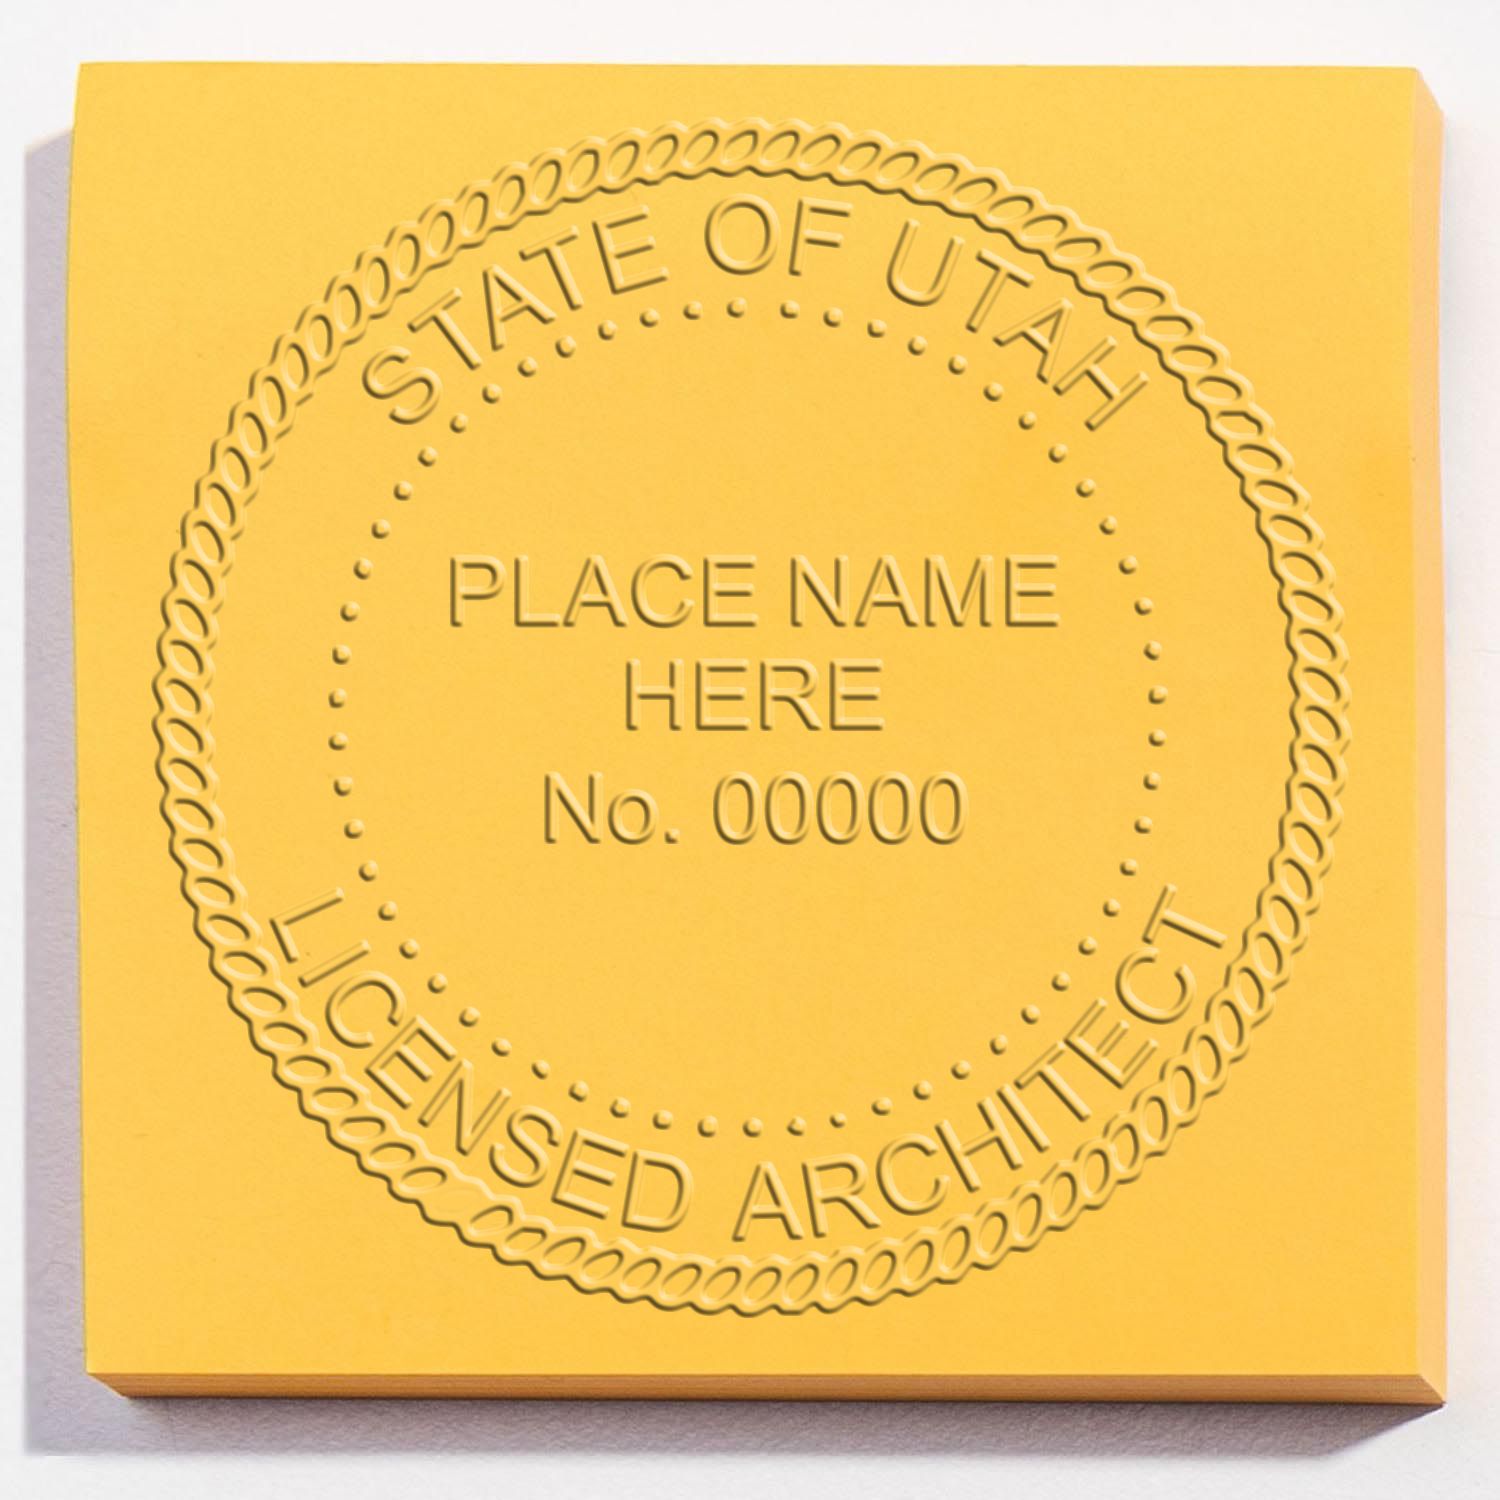 A lifestyle photo showing a stamped image of the Utah Desk Architect Embossing Seal on a piece of paper